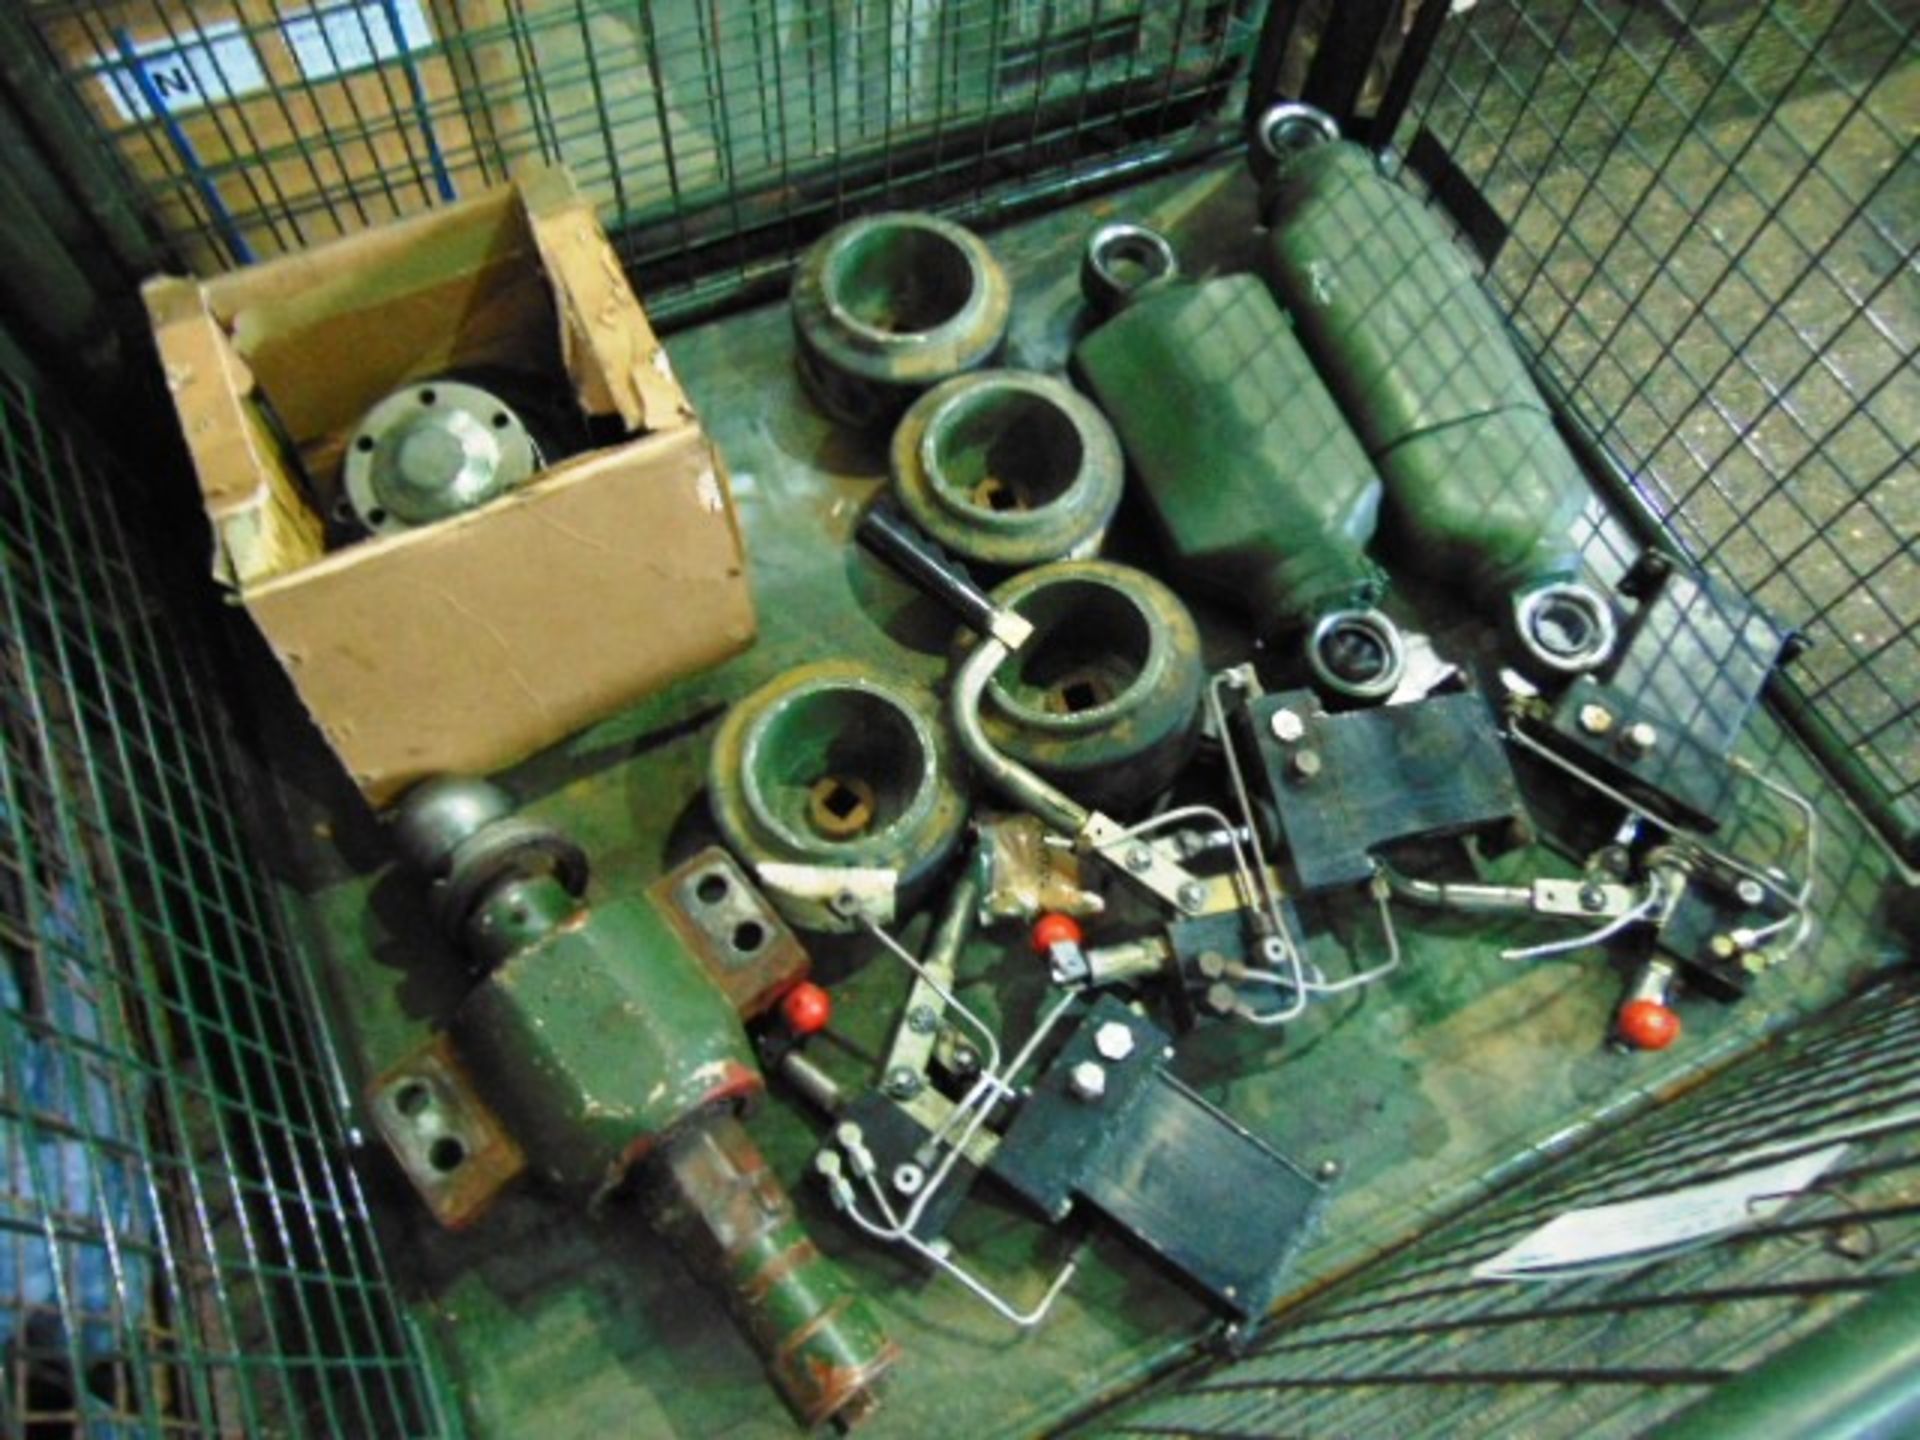 Mixed Stillage of CVRT, Warrior and FV Parts consisting of Wheels, Pumps, Shock Absorbers etc